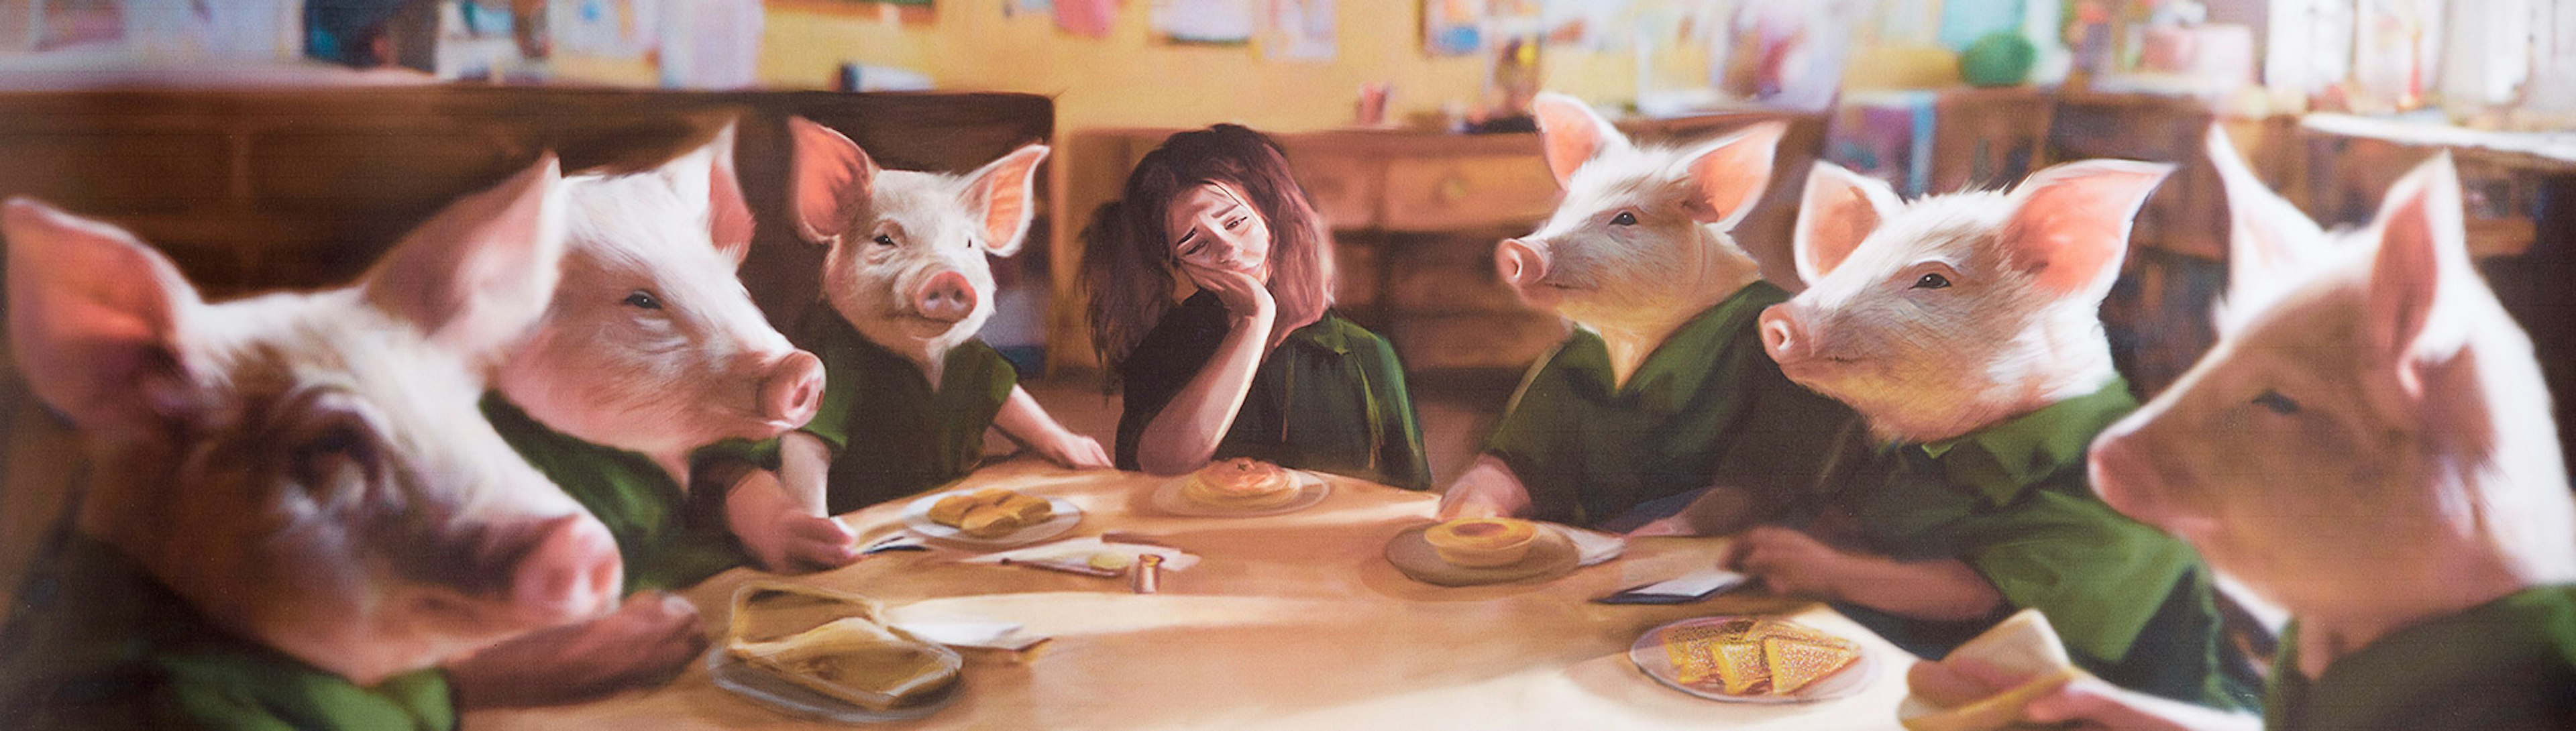 A painting of a young girl that looks sad sitting at a round table with three pink pigs on either side of her sitting at the table like humans wearing green t shirts